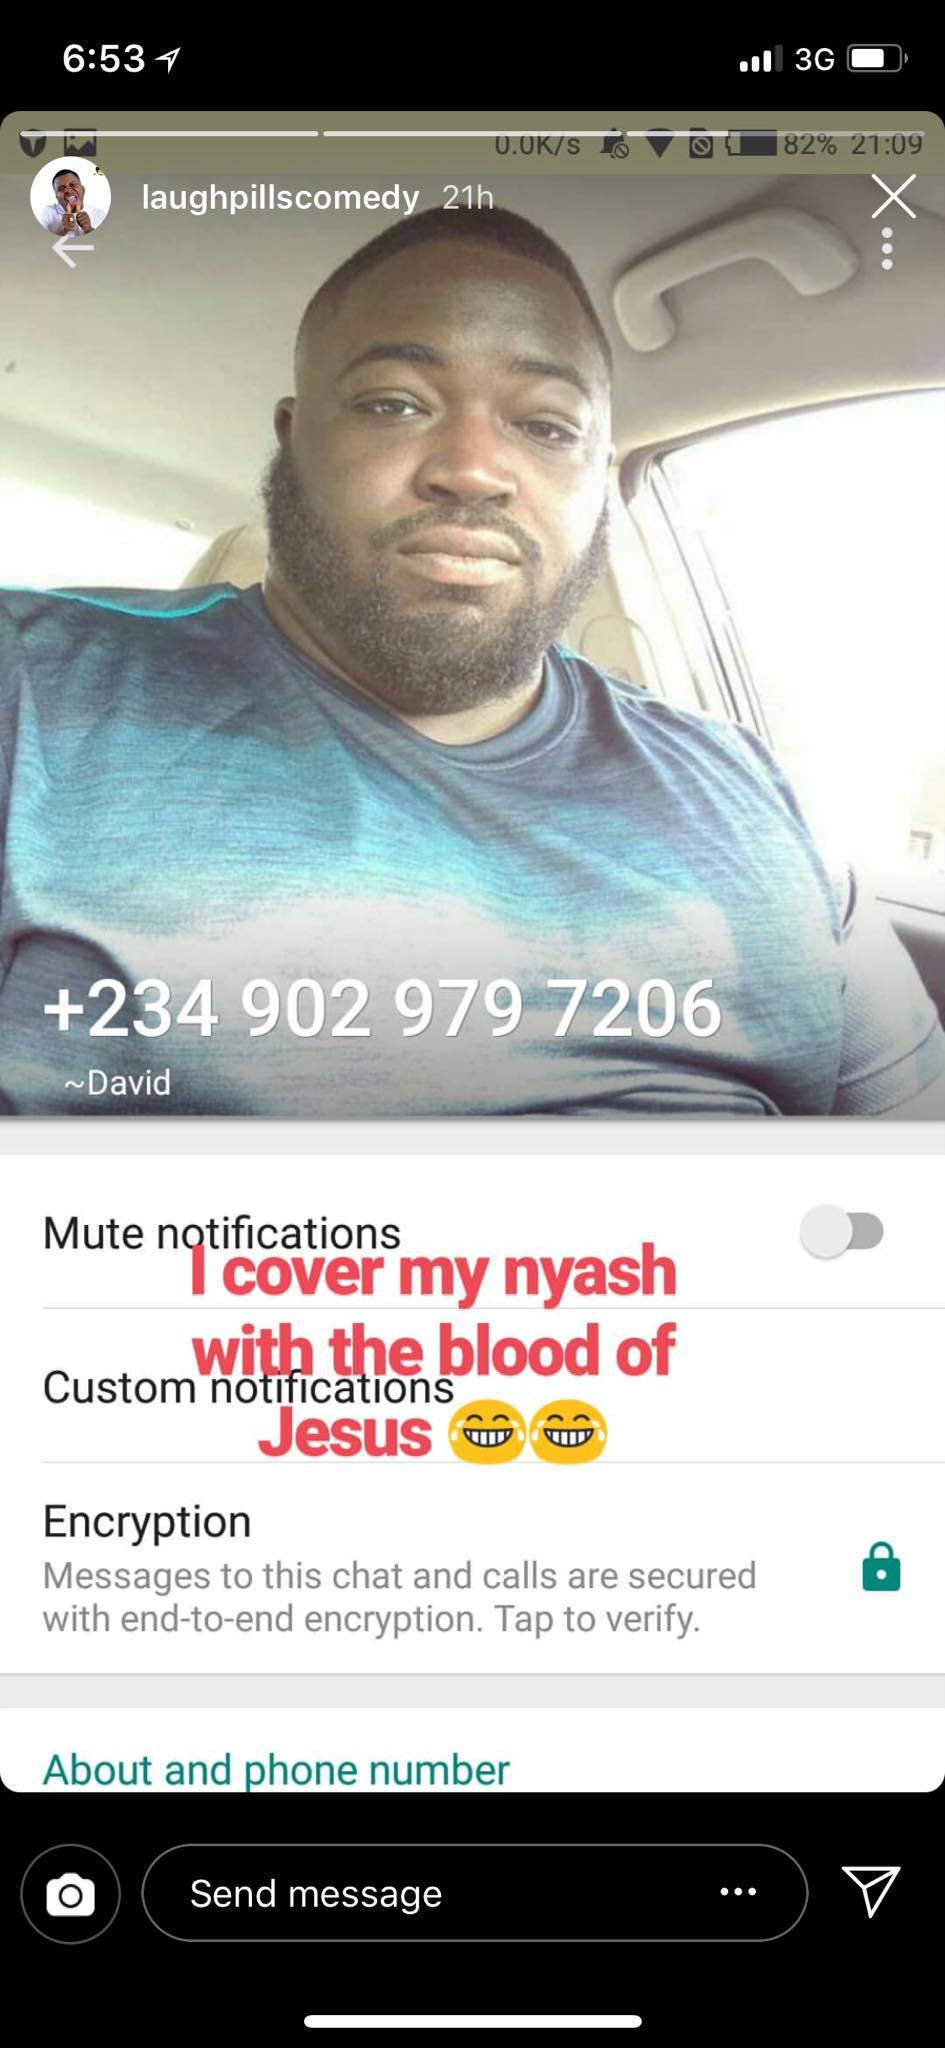 IG comedian, Laughpillscomedy shares screenshot of his chat with a Nigerian man who wants to have s*x with him